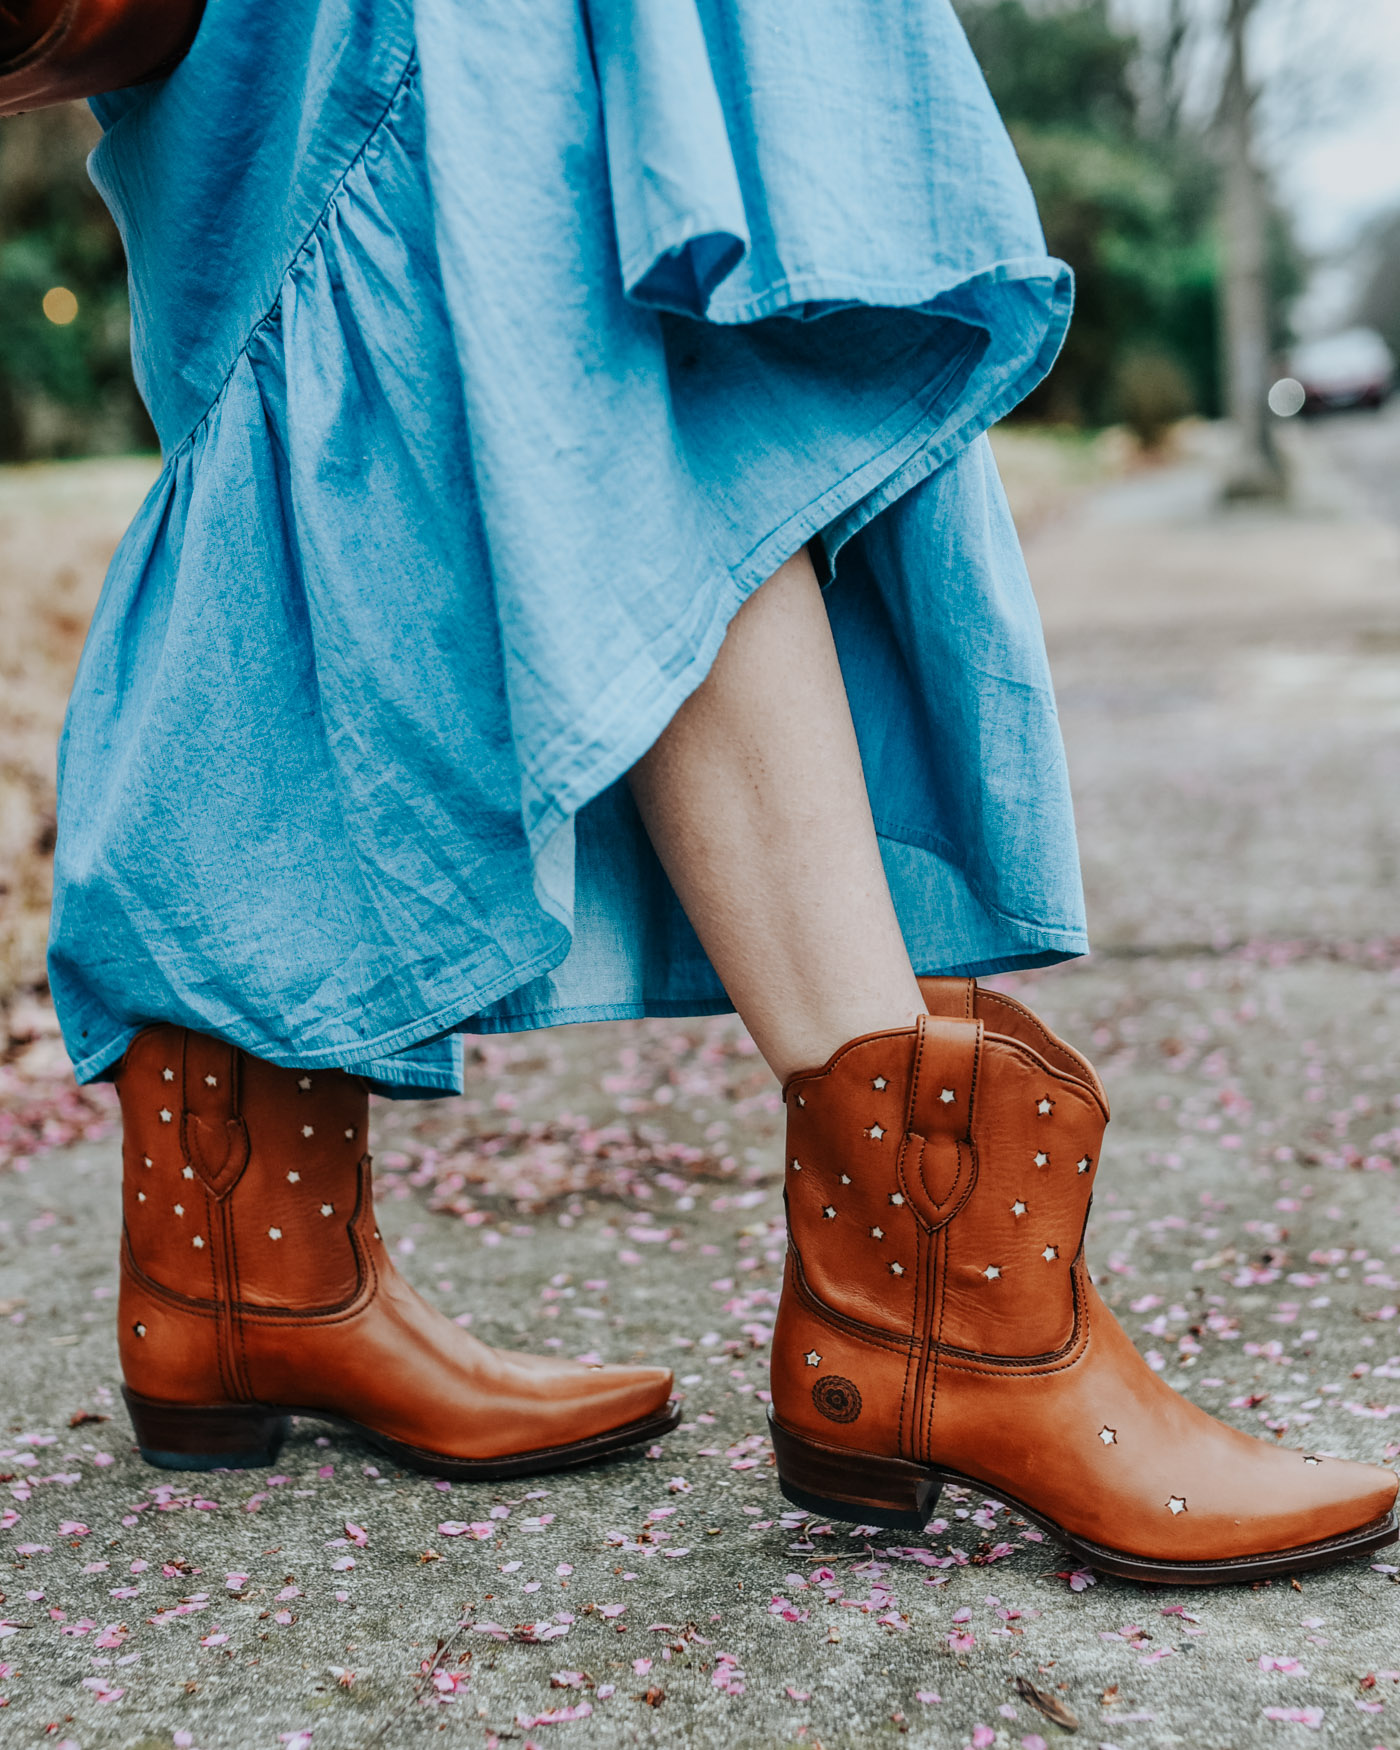 Maxi Dress and Cowboy Boots look styled by top Memphis fashion blog, Lone Star Looking Glass.